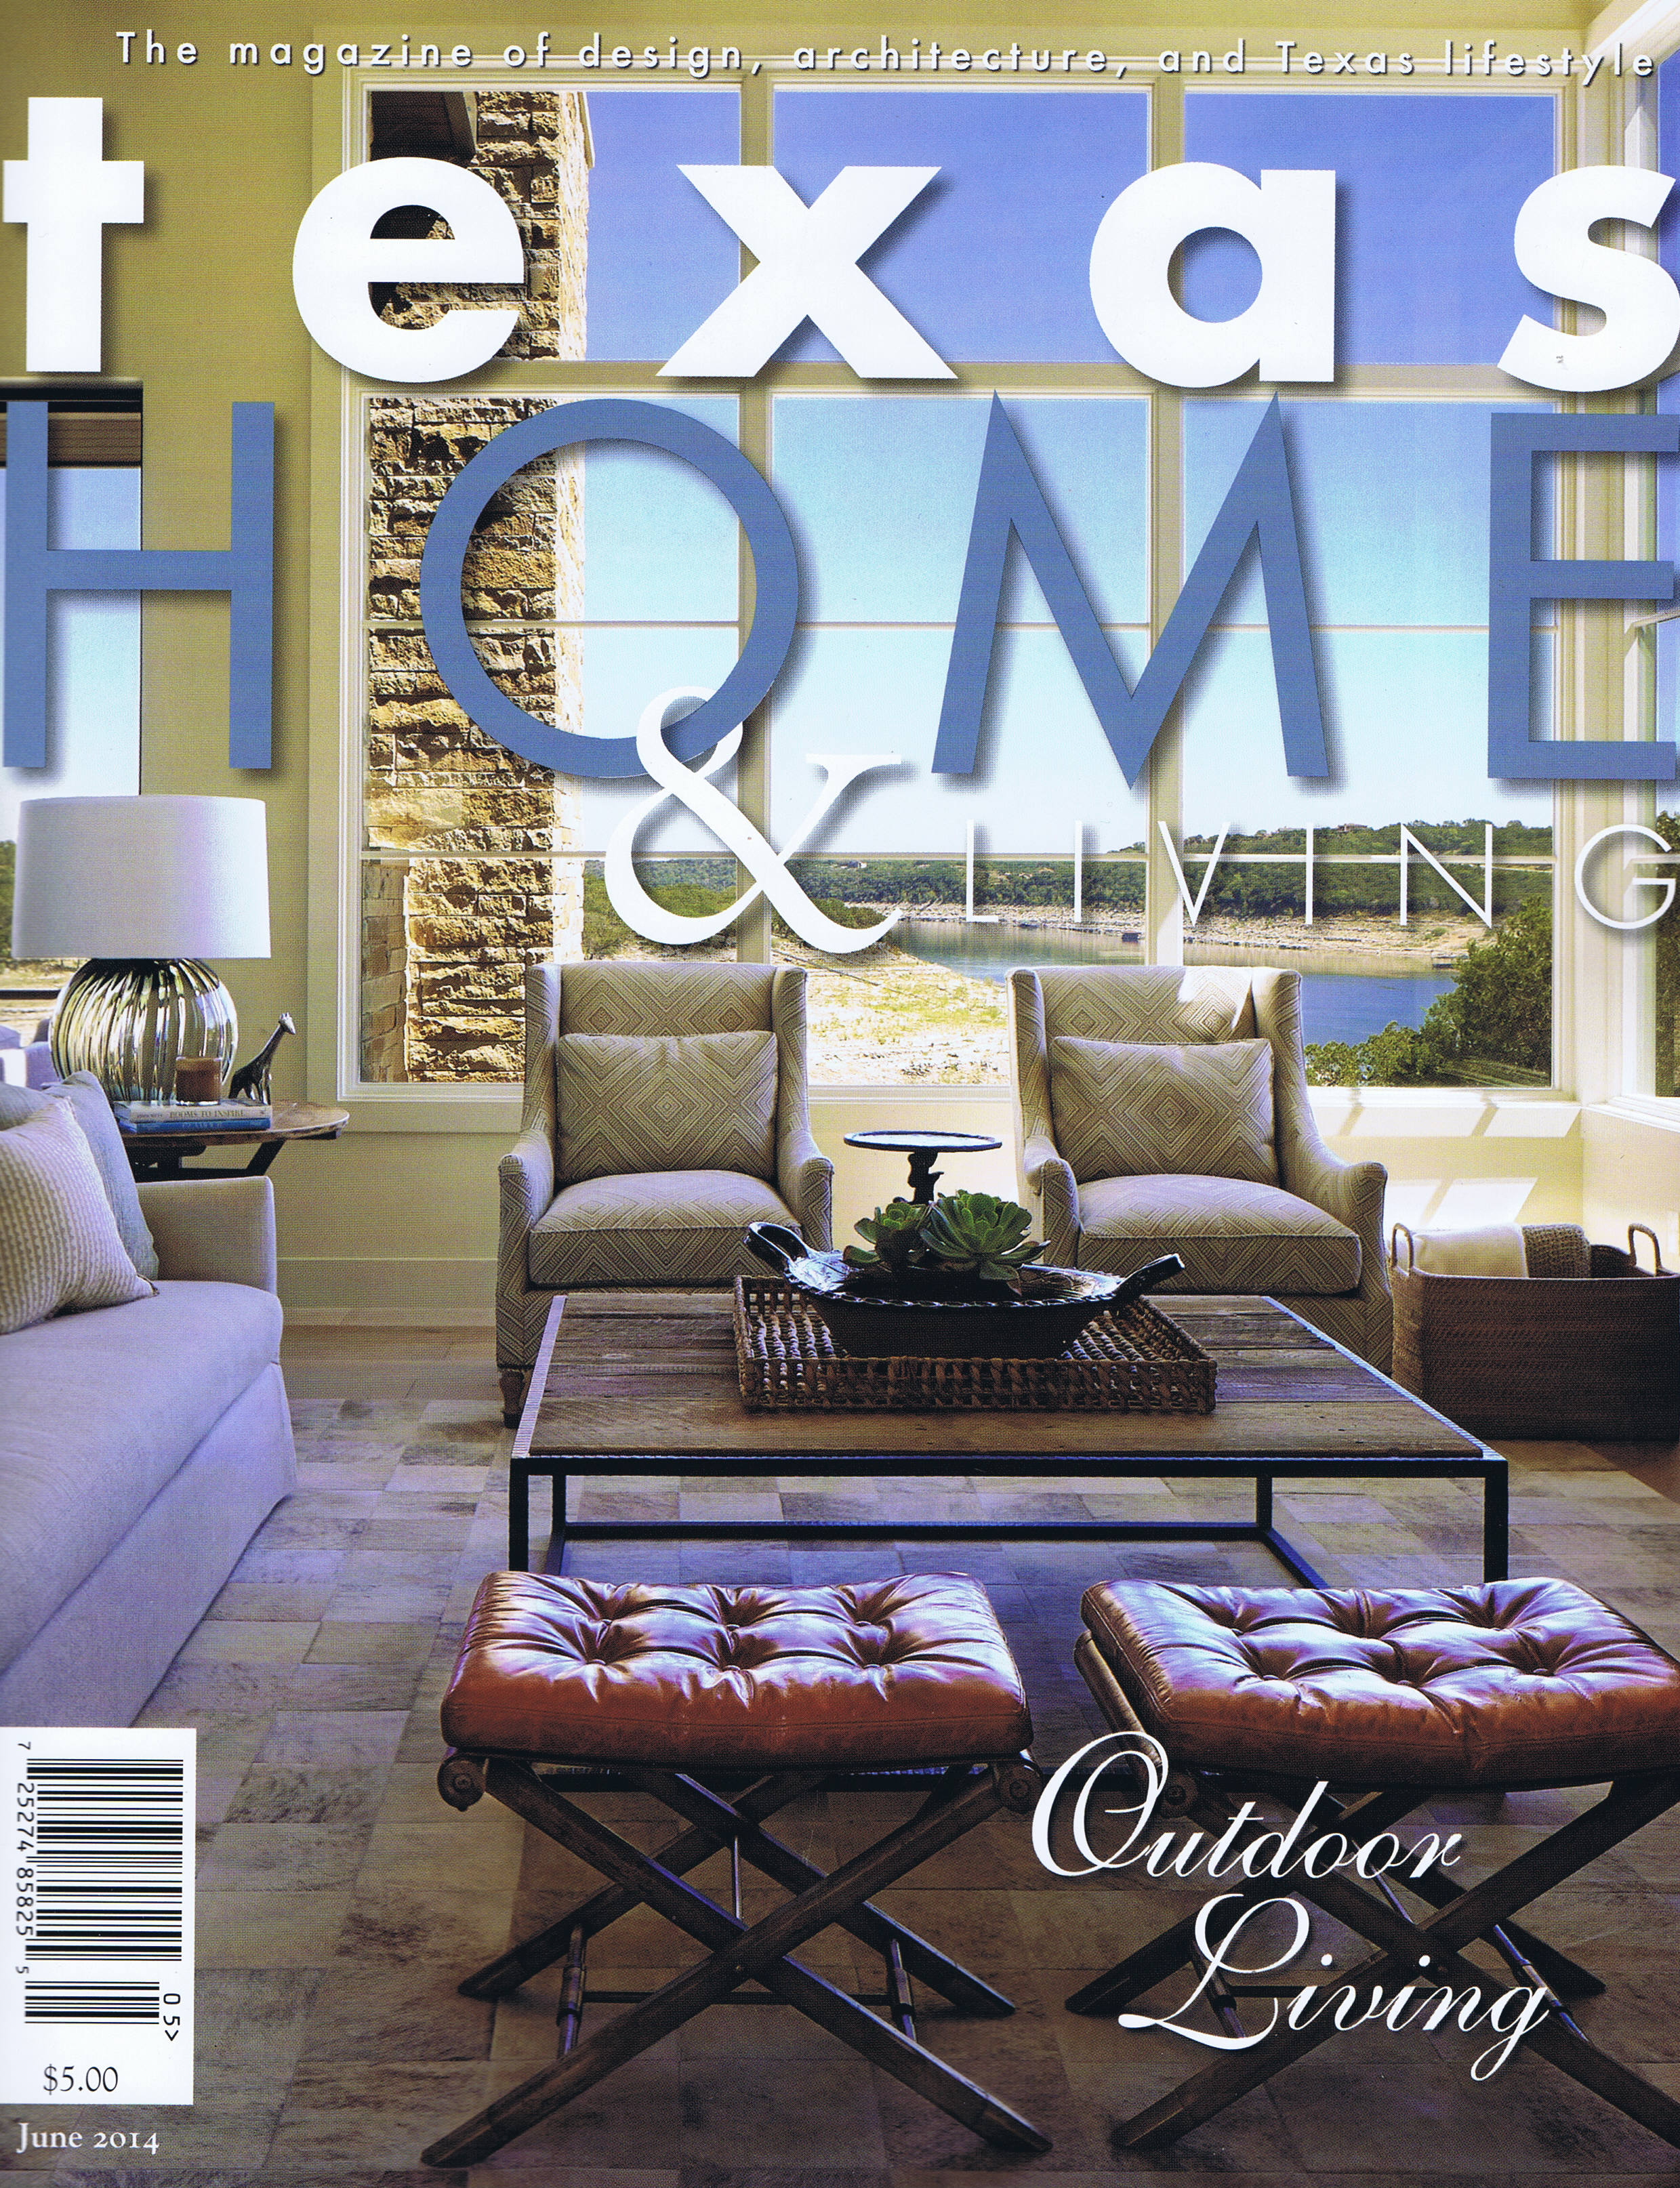 Texas H and L article-may 2014 02